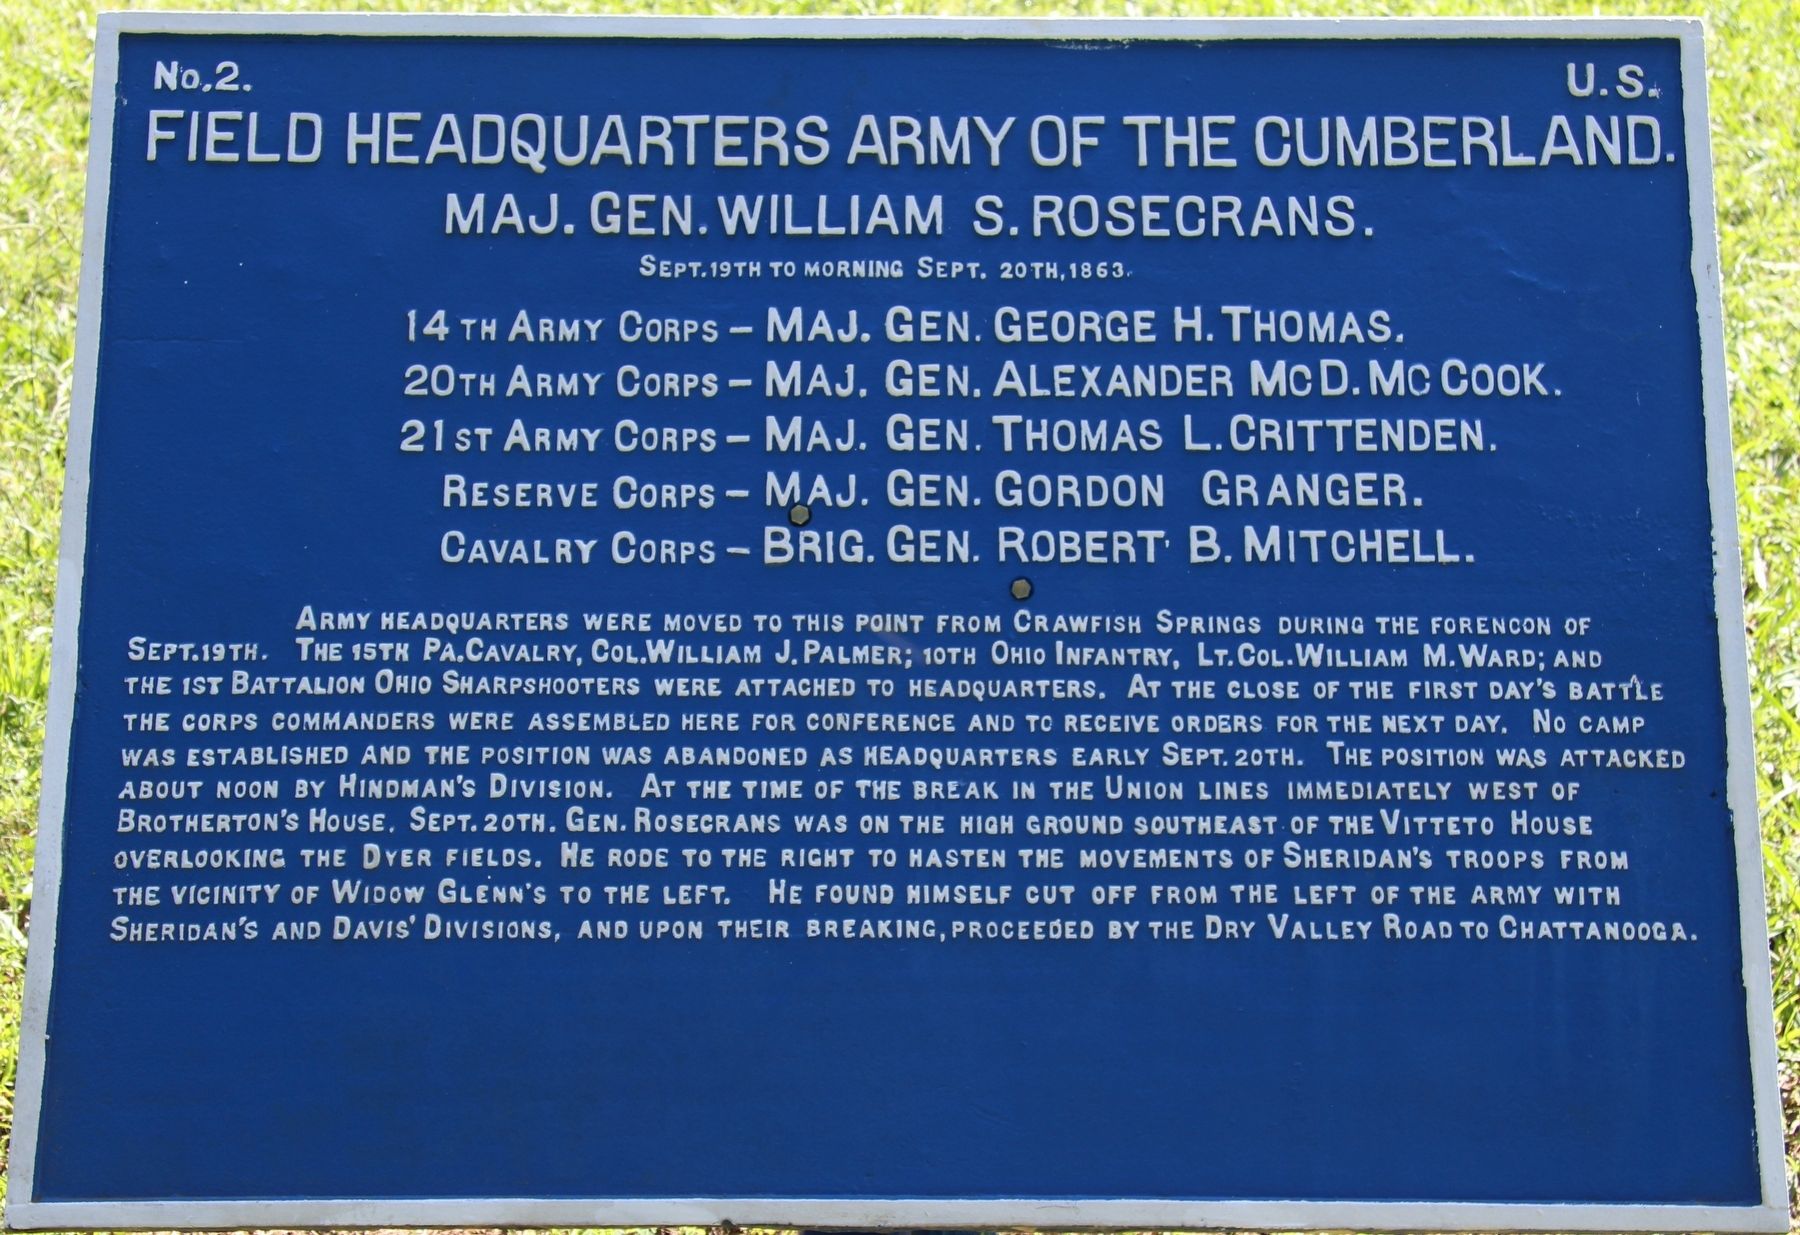 Field Headquarters Army of the Cumberland. Marker image. Click for full size.